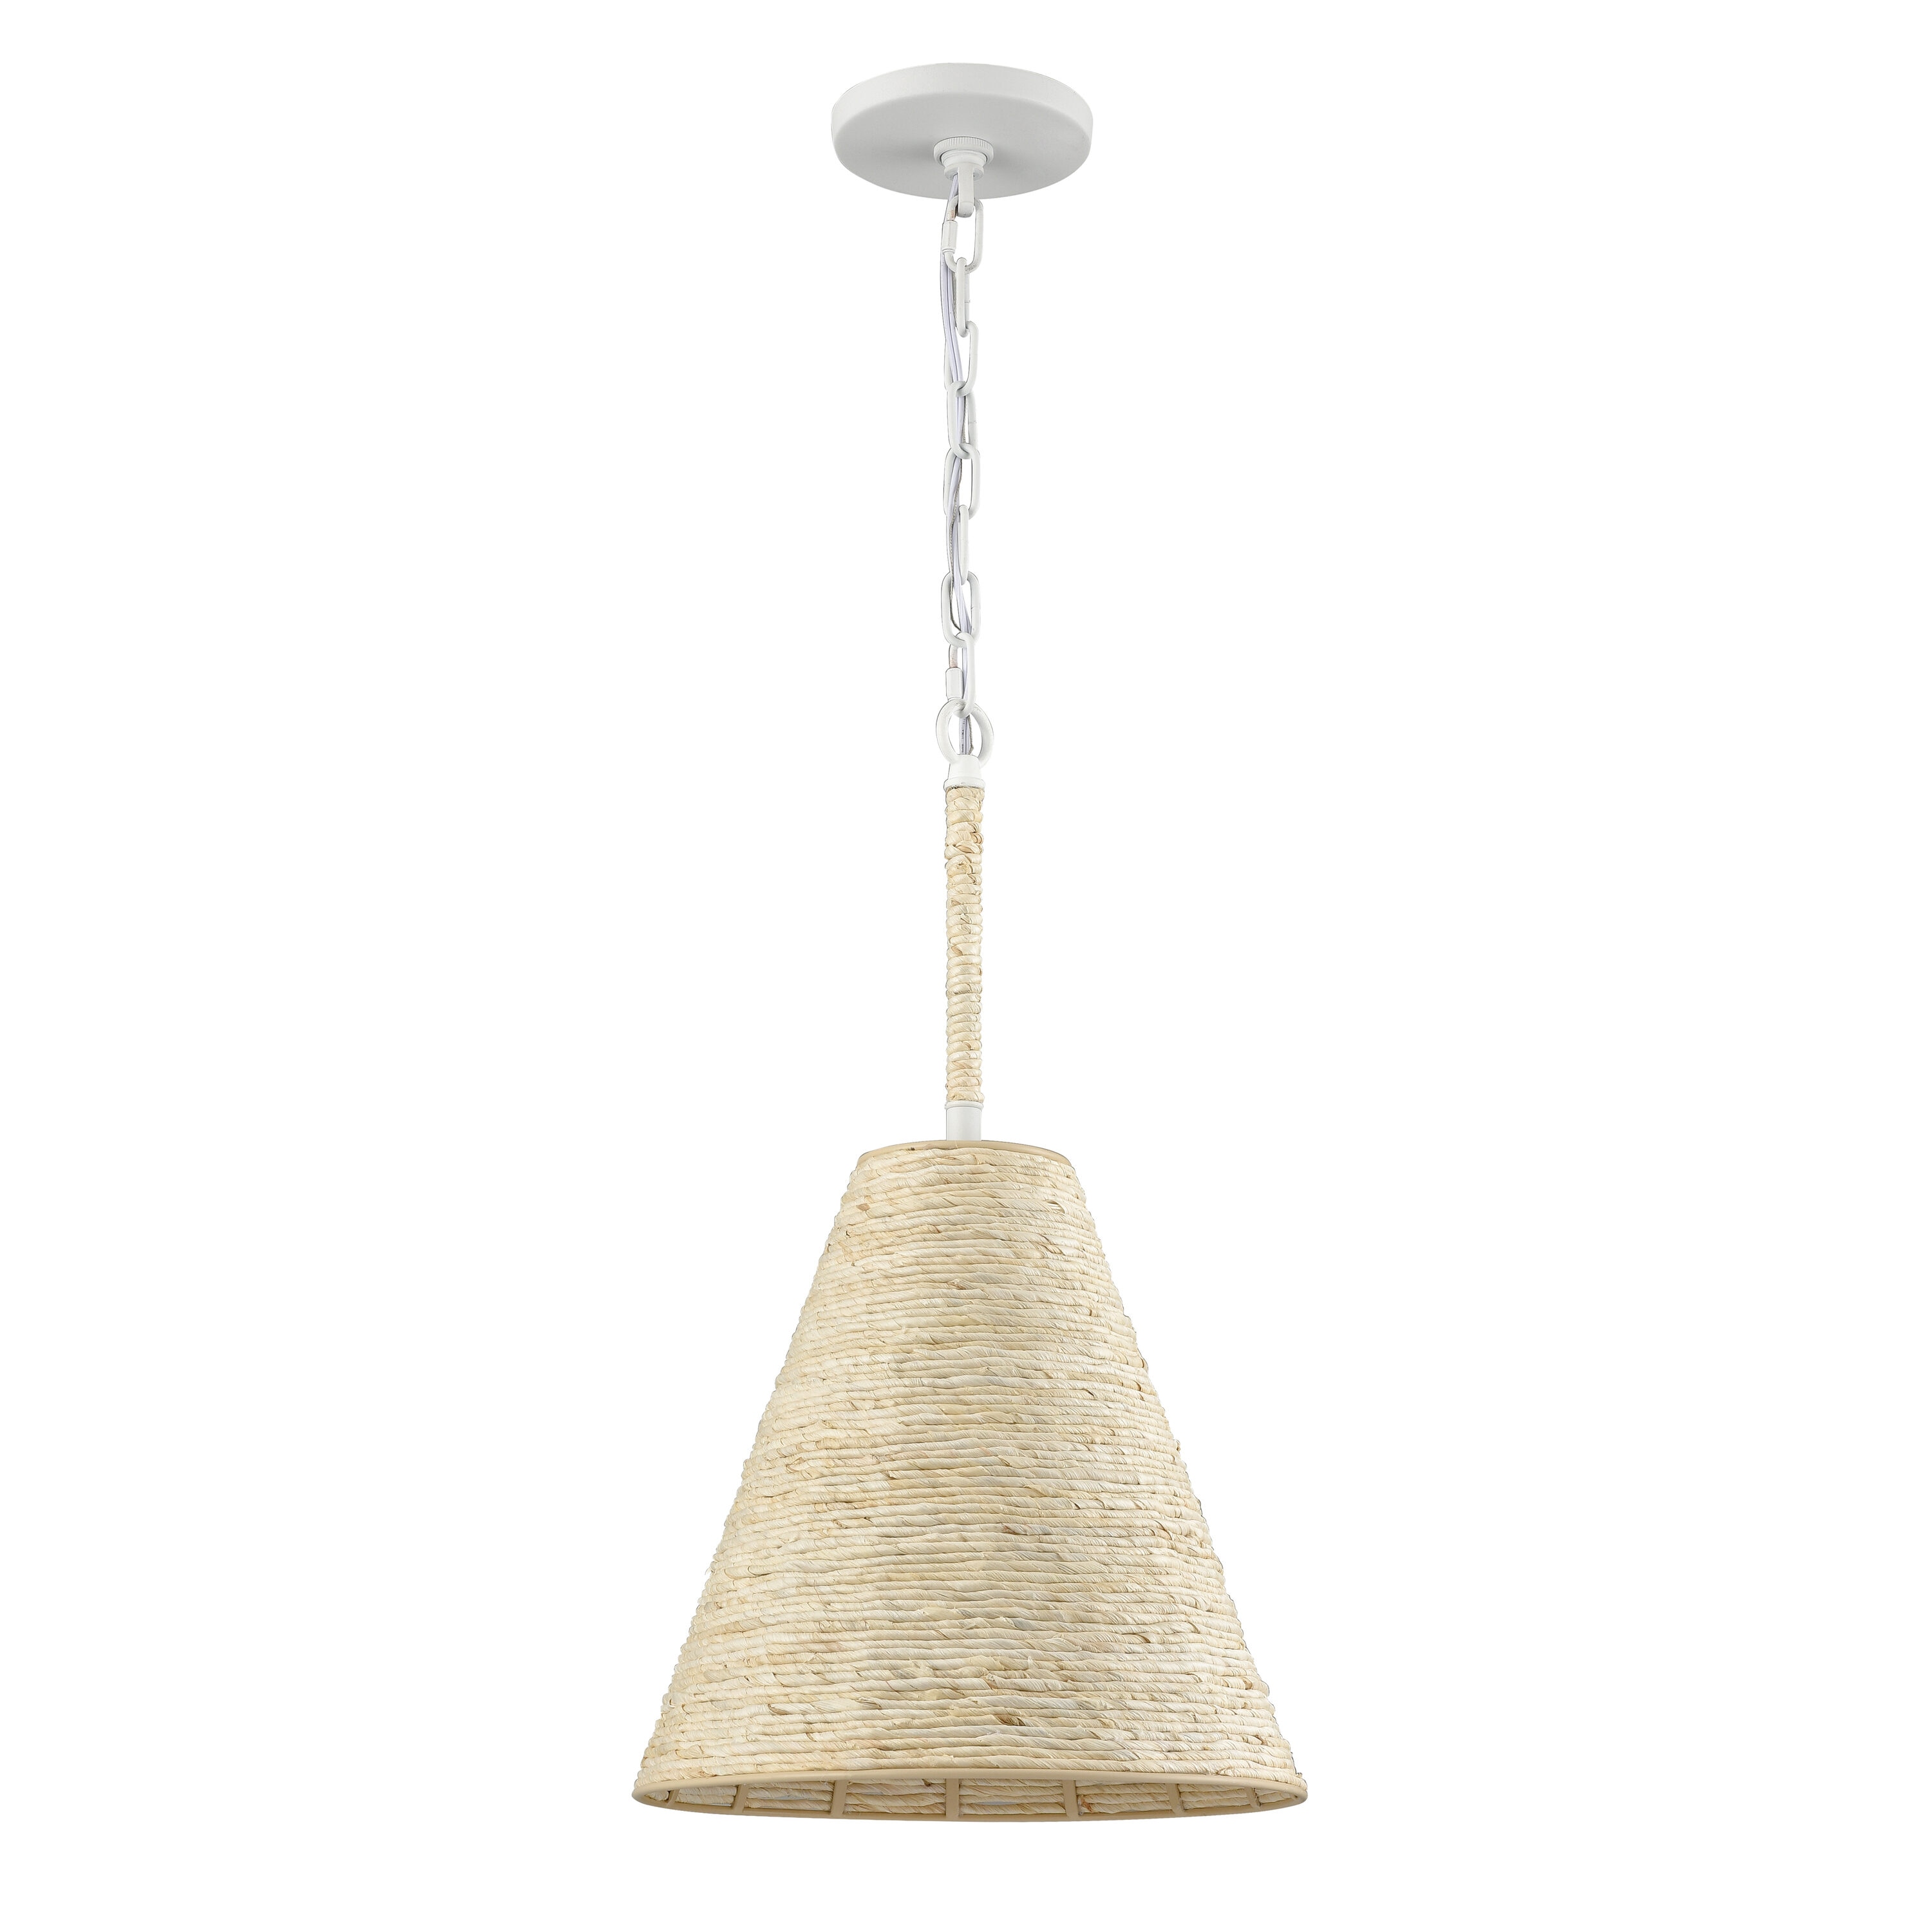 Our Watley White Cone Pendant boasts a modern and minimalistic design with  a chic brass finish on its inter…